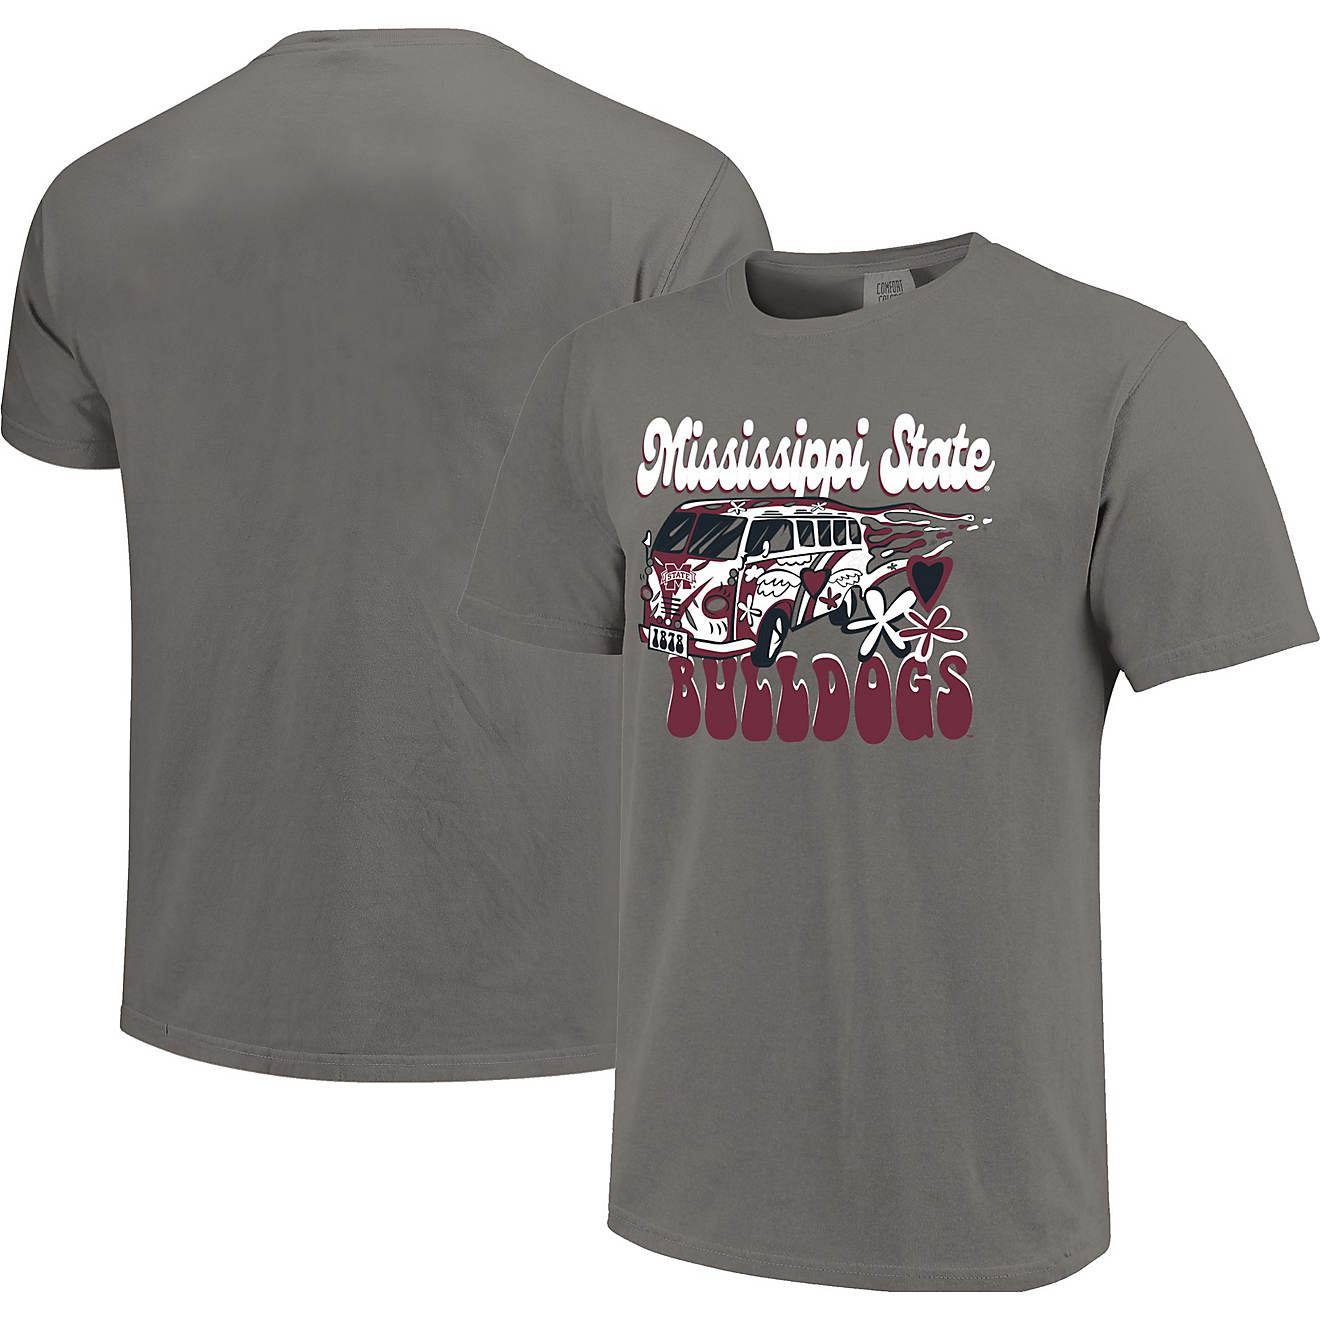 Image One Girls' Mississippi State University Comfort Color Graphic T-shirt                                                      - view number 1